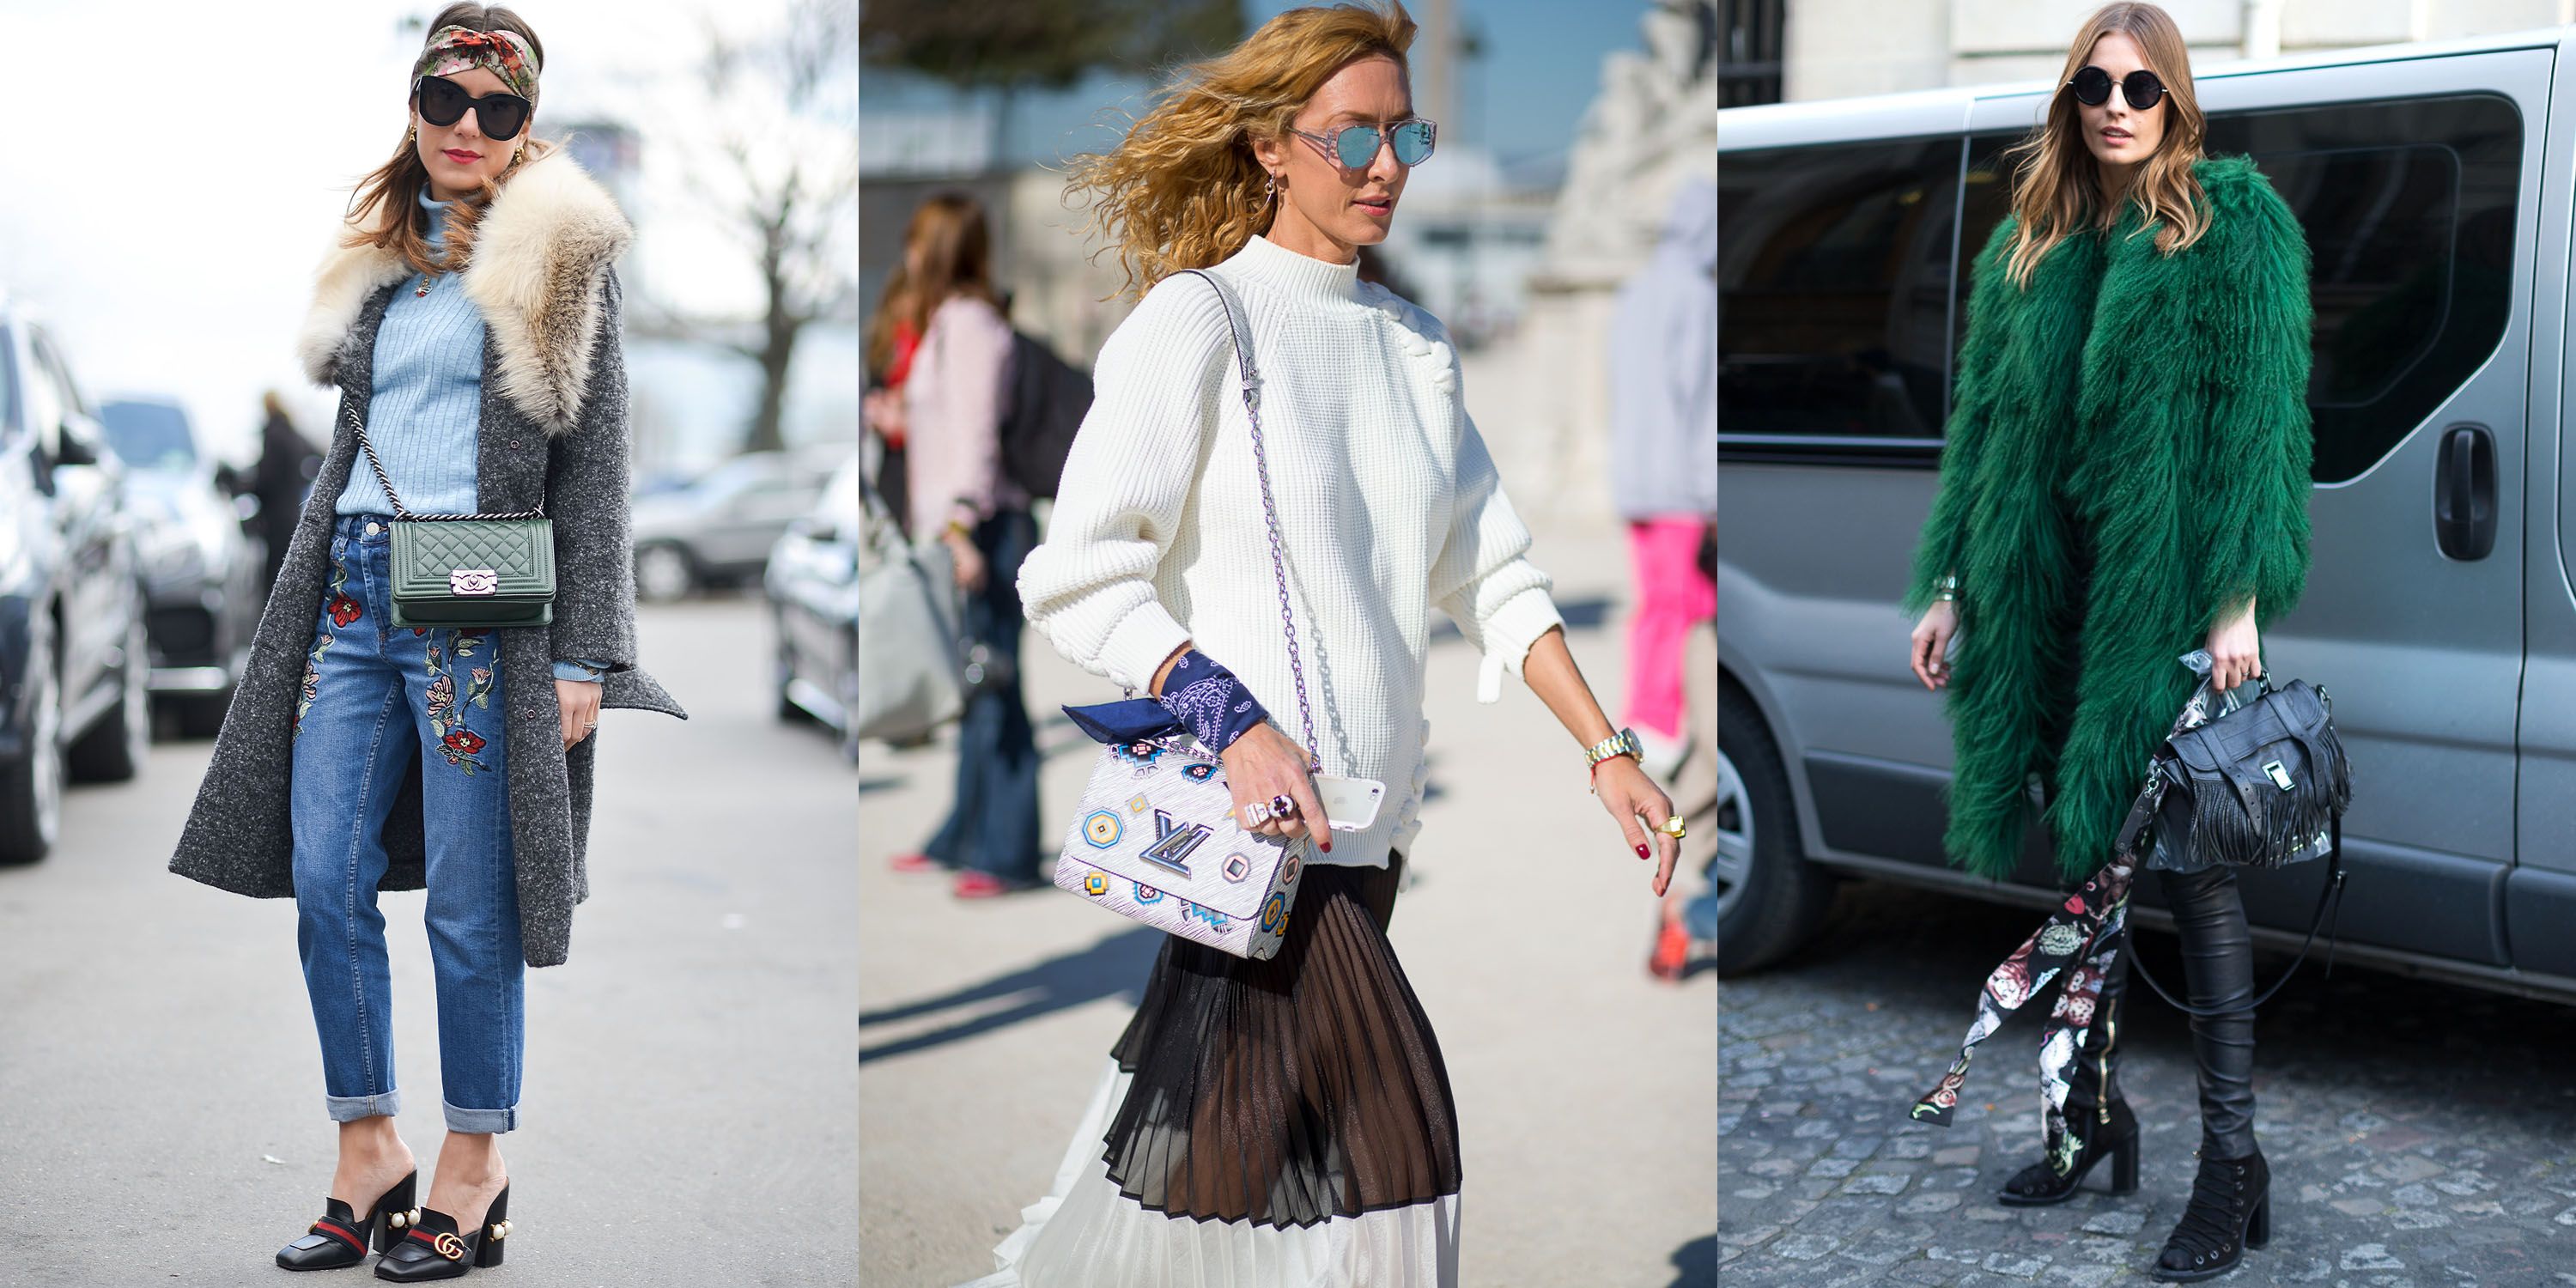 How To Style Your Accessories - Best Accessory Trends